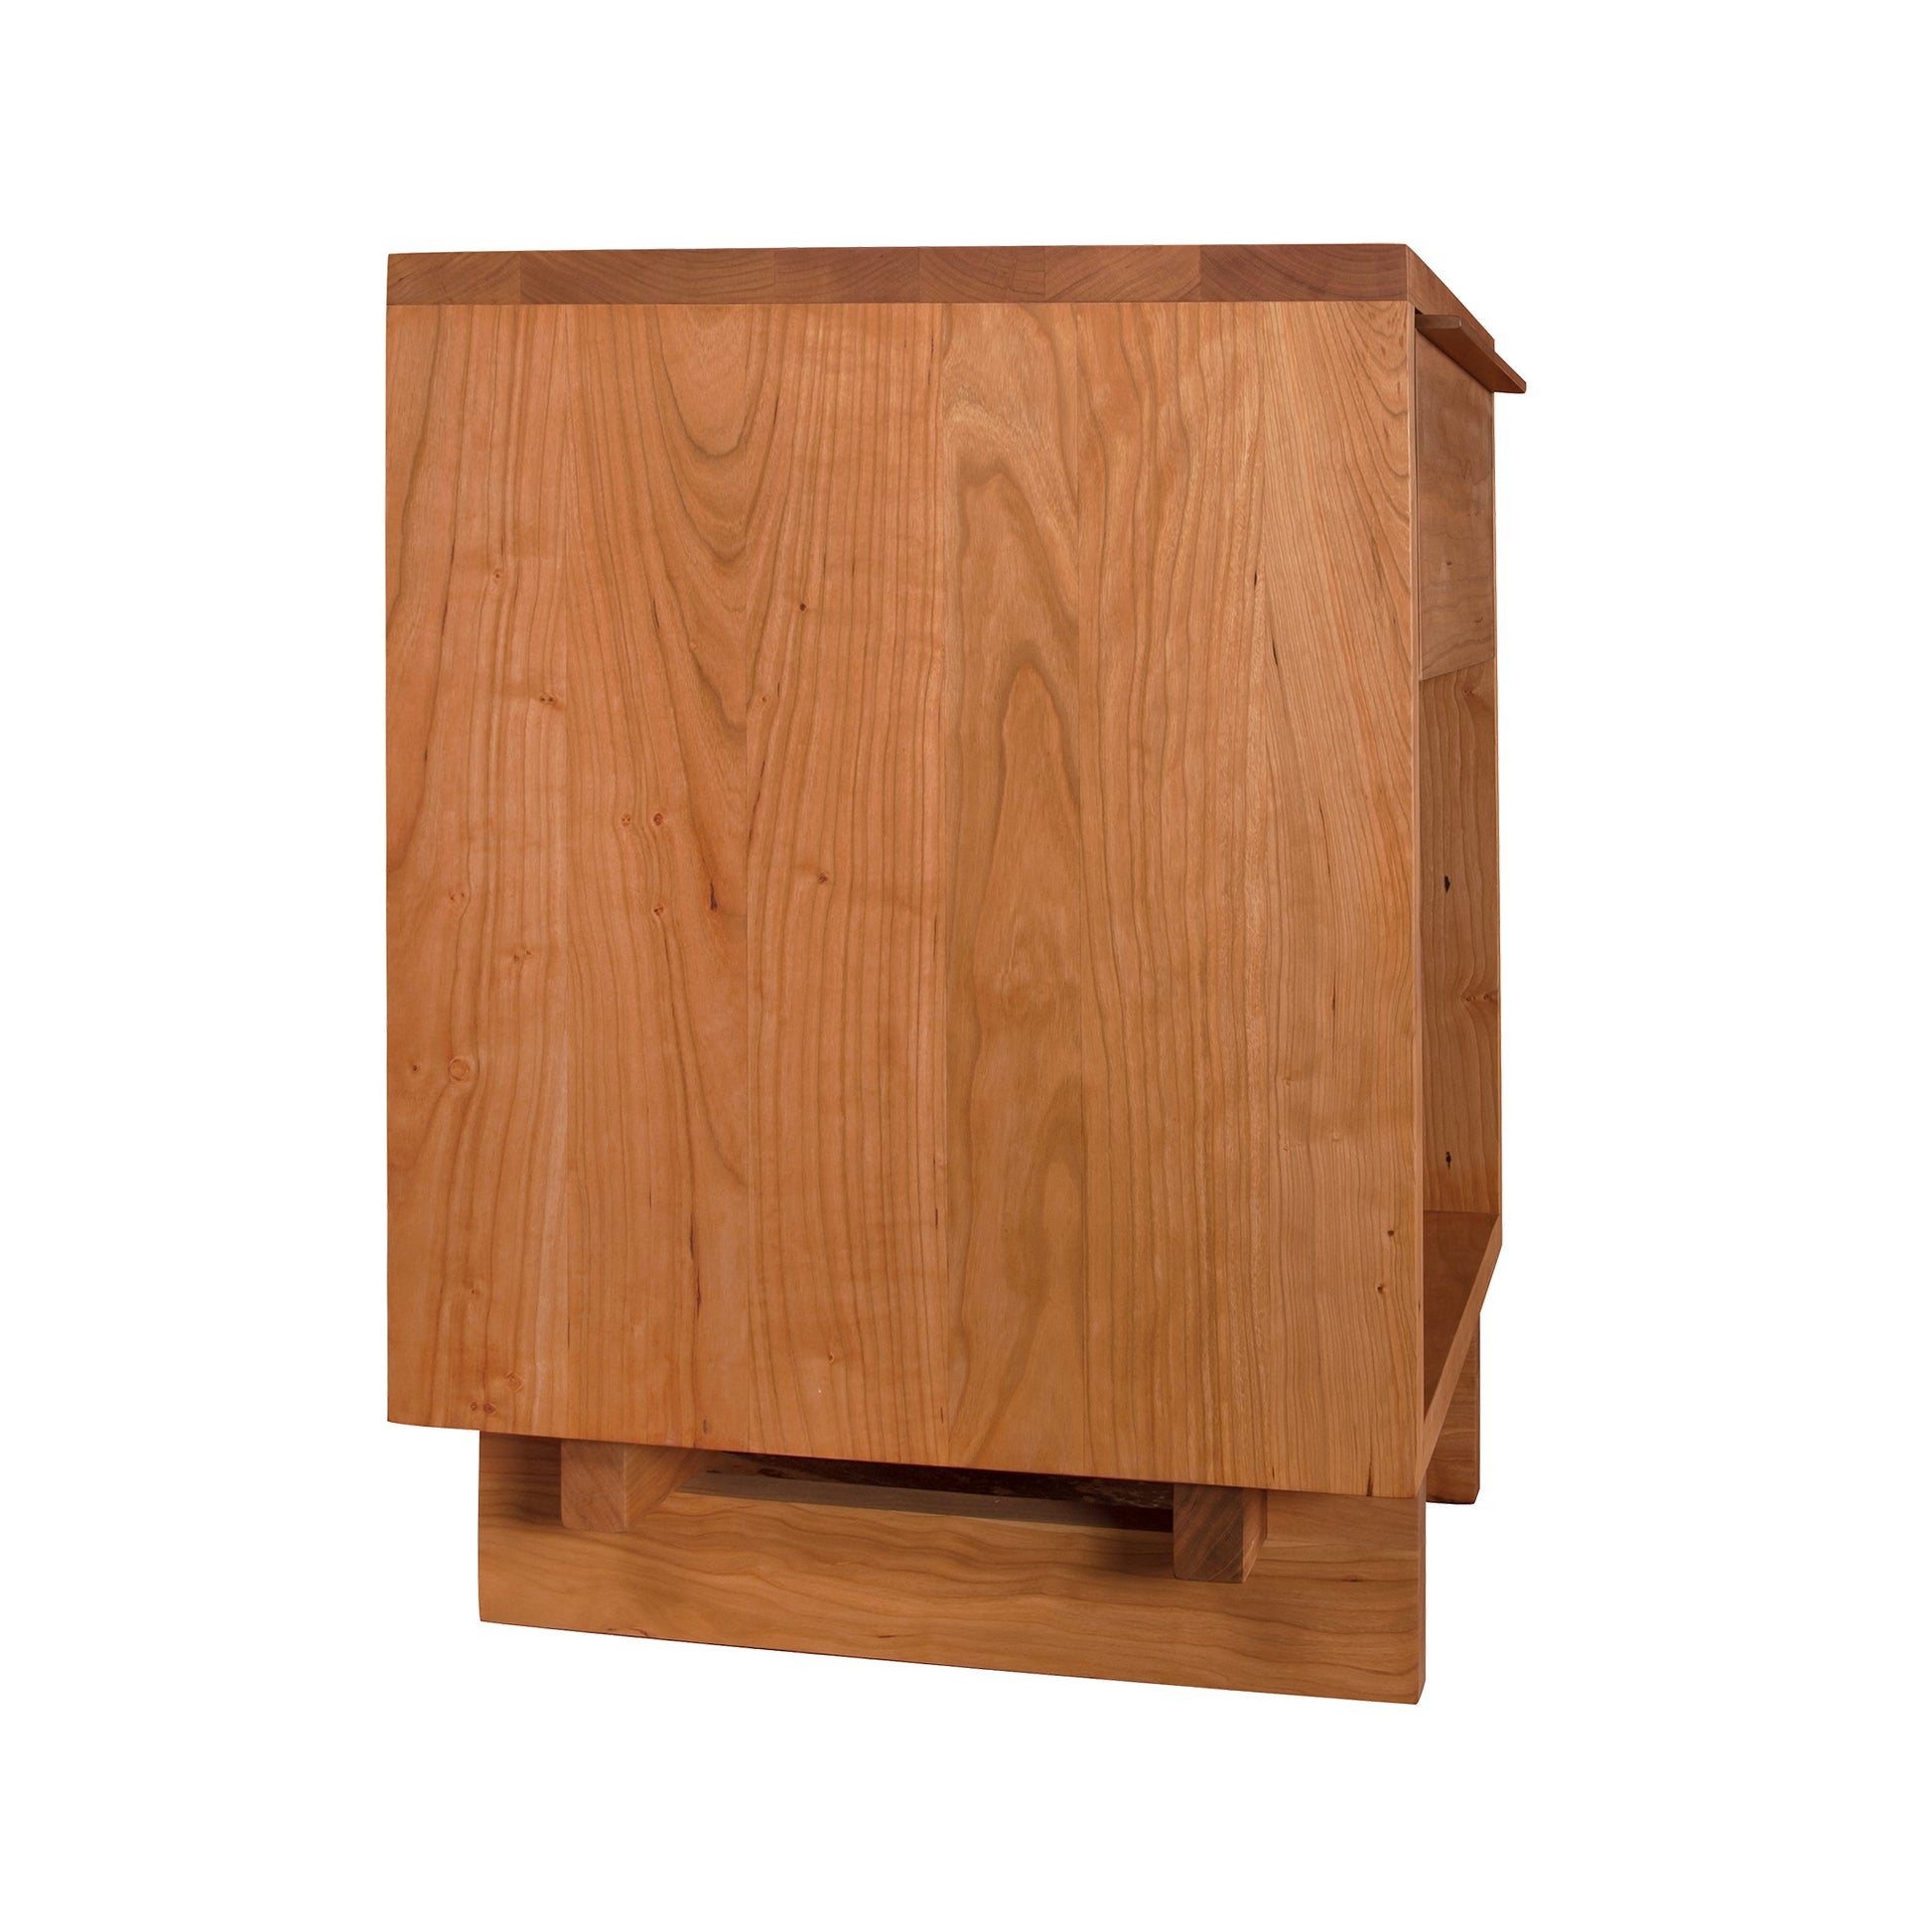 Modern design Kipling 1-Drawer Enclosed Shelf Nightstand in the upright position with the leaf extended, isolated on a white background by Vermont Furniture Designs.